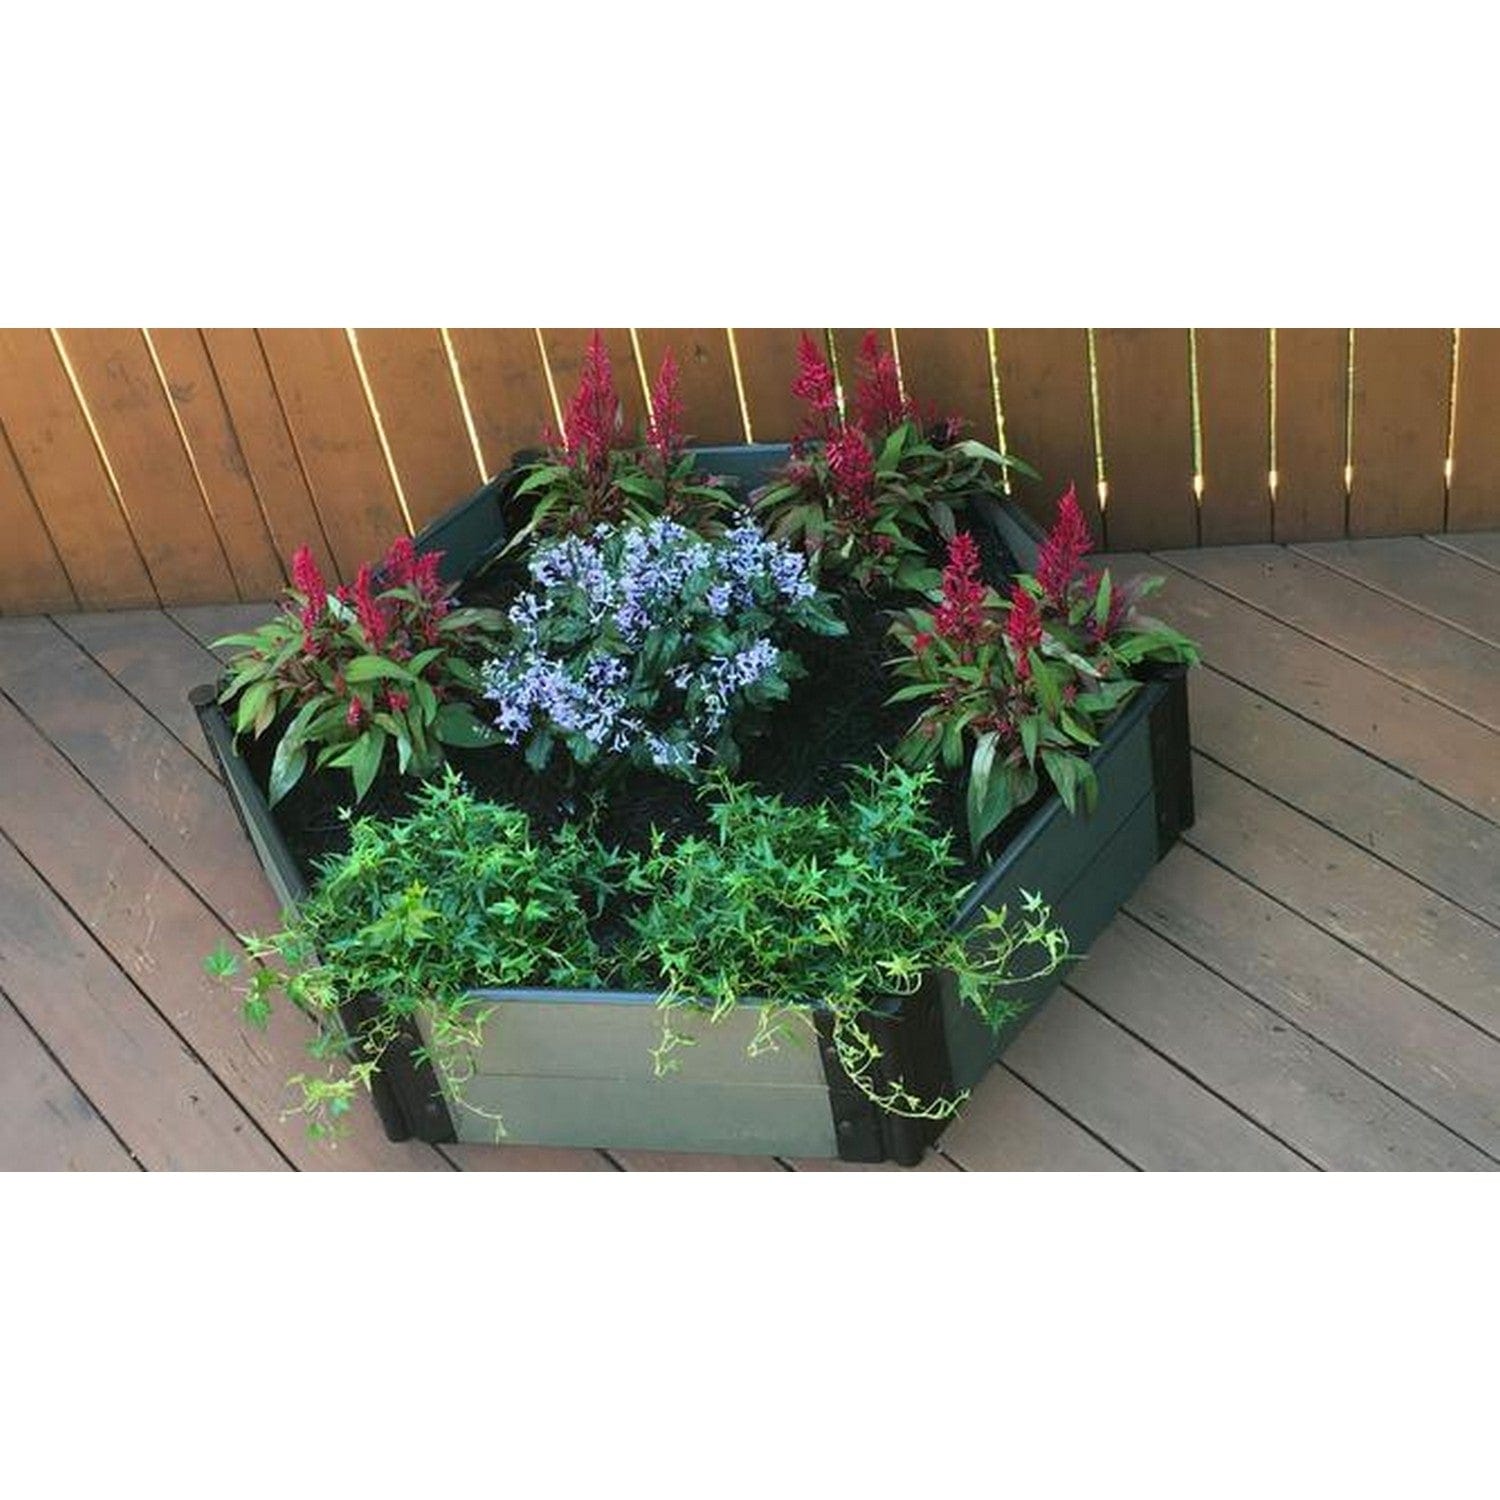 Frame It All Gardening Accessories Frame It All | Tool-Free Fort Jefferson Raised Garden Bed (Hexagon) 4' X 4' X 16.5" - Weathered Wood - 1" Profile 200003468